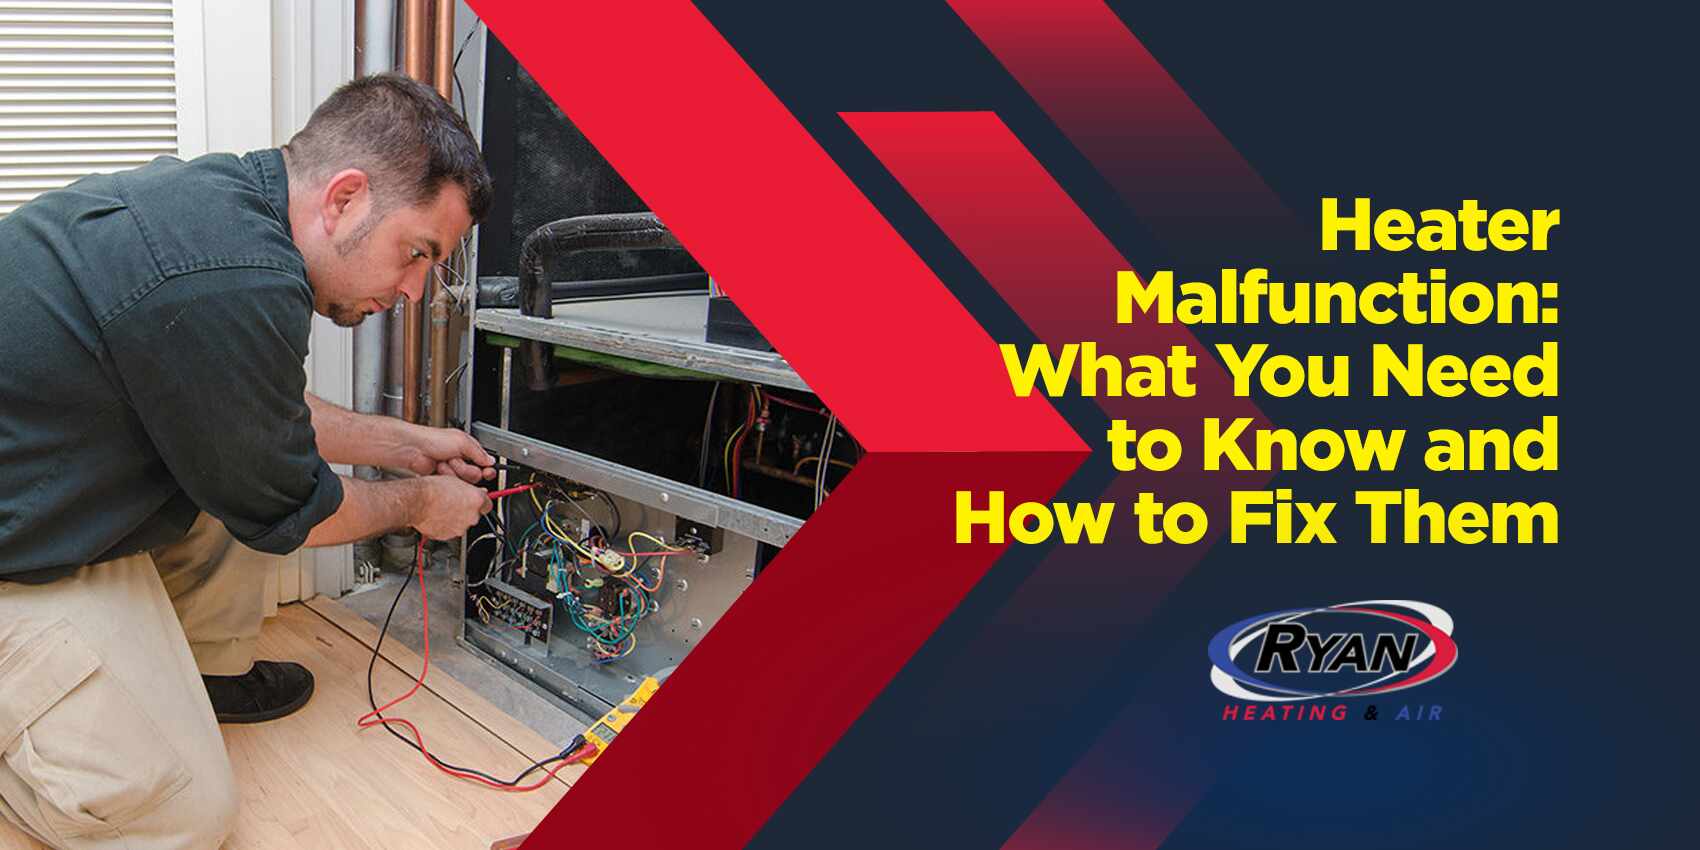 Heater Malfunction: What You Need to Know and How to Fix Them